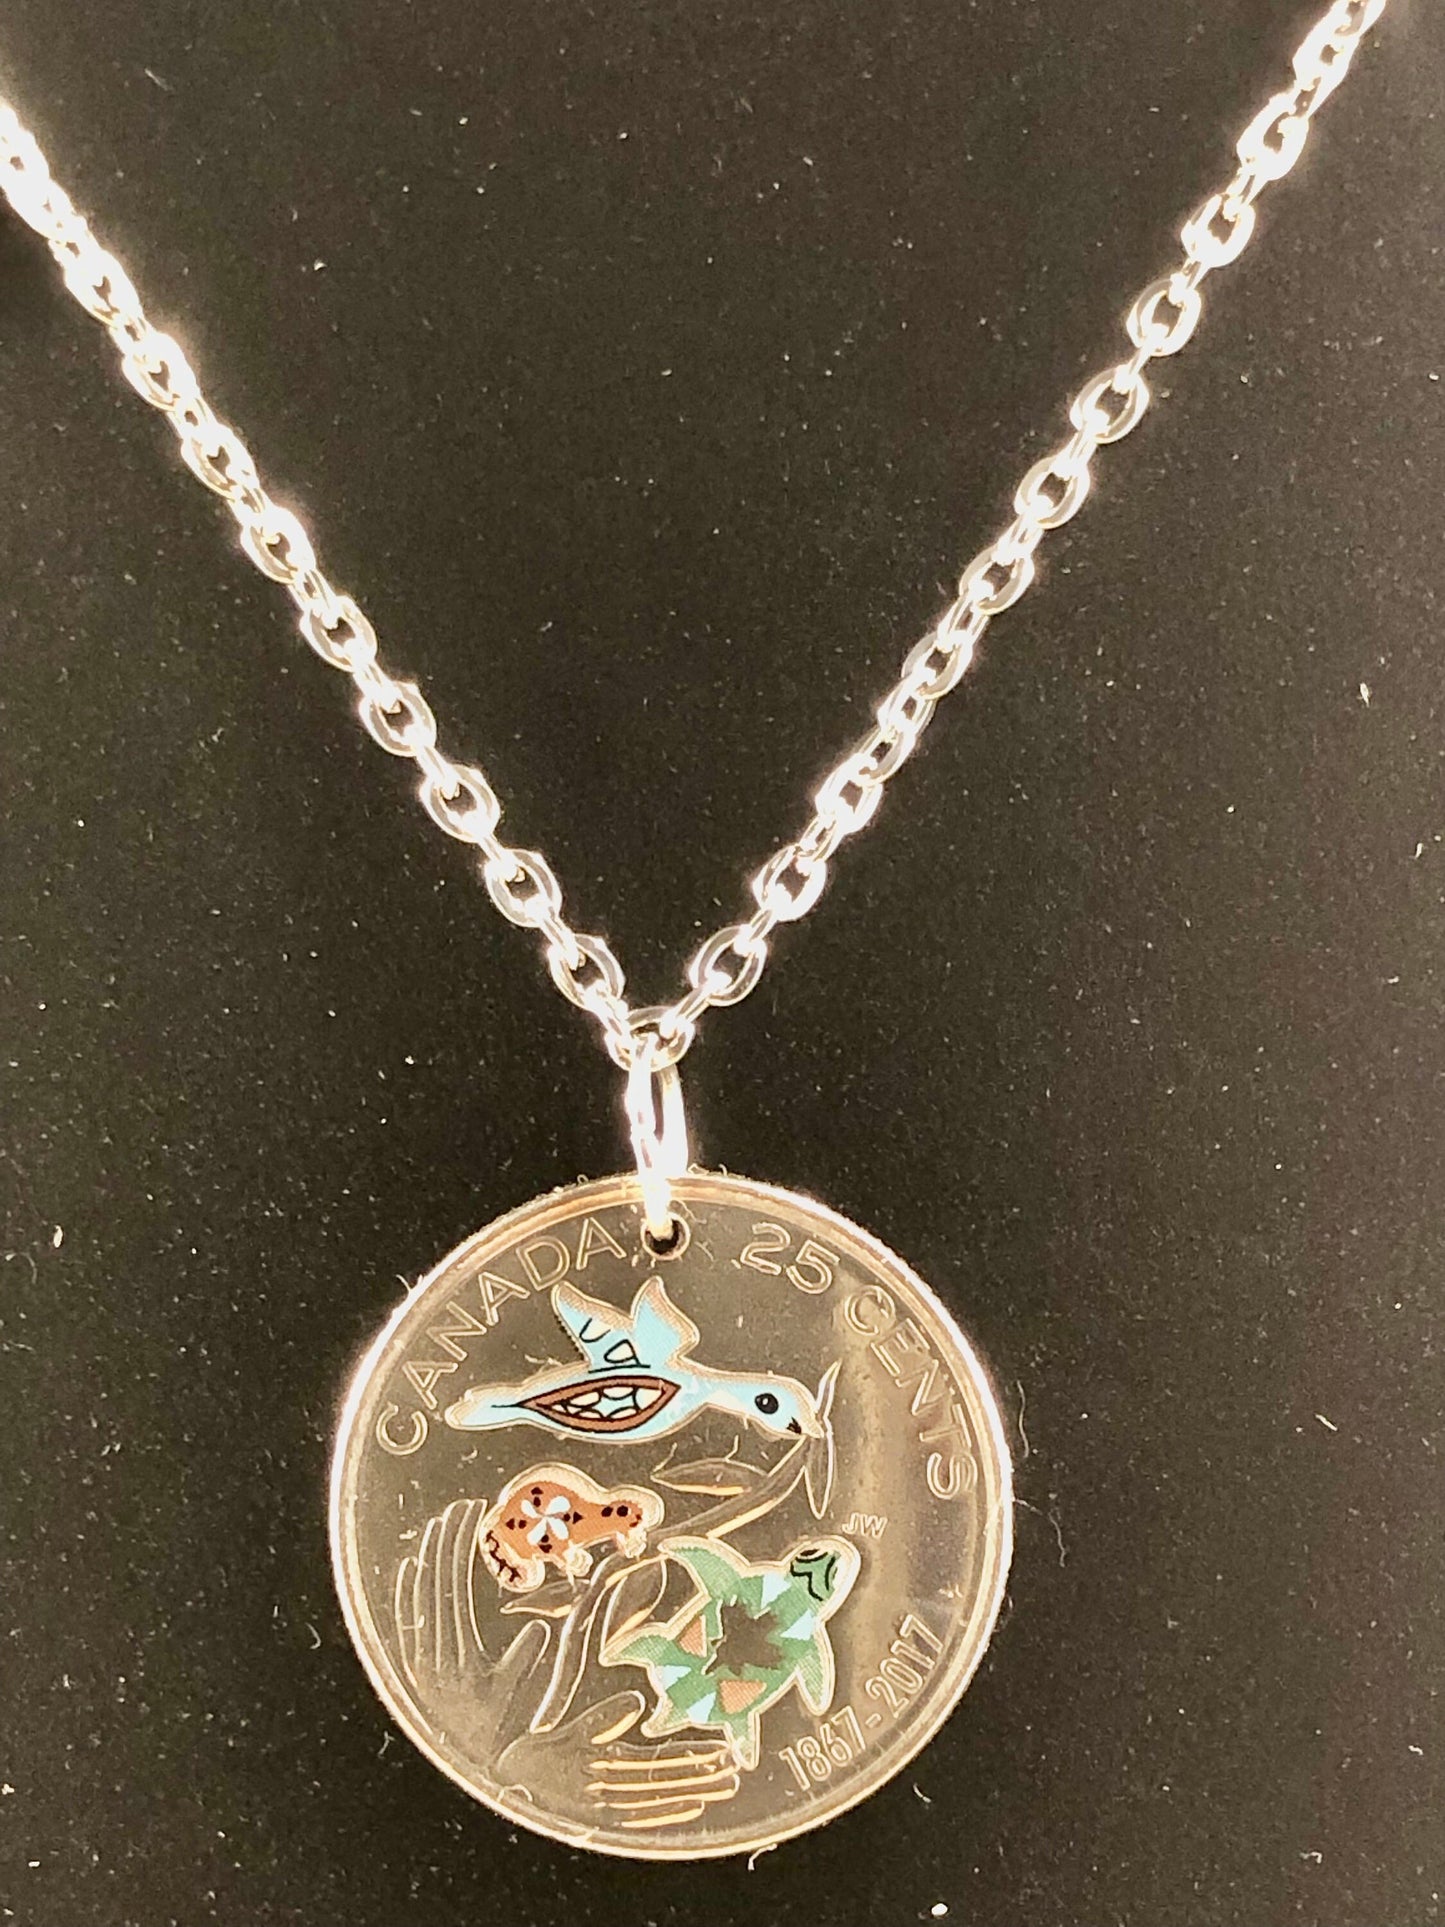 Canadian Quarter Necklace Pendant Canada 2017 25 Turtles Custom Made Vintage and Rare coins - Coin Enthusiast Handmade